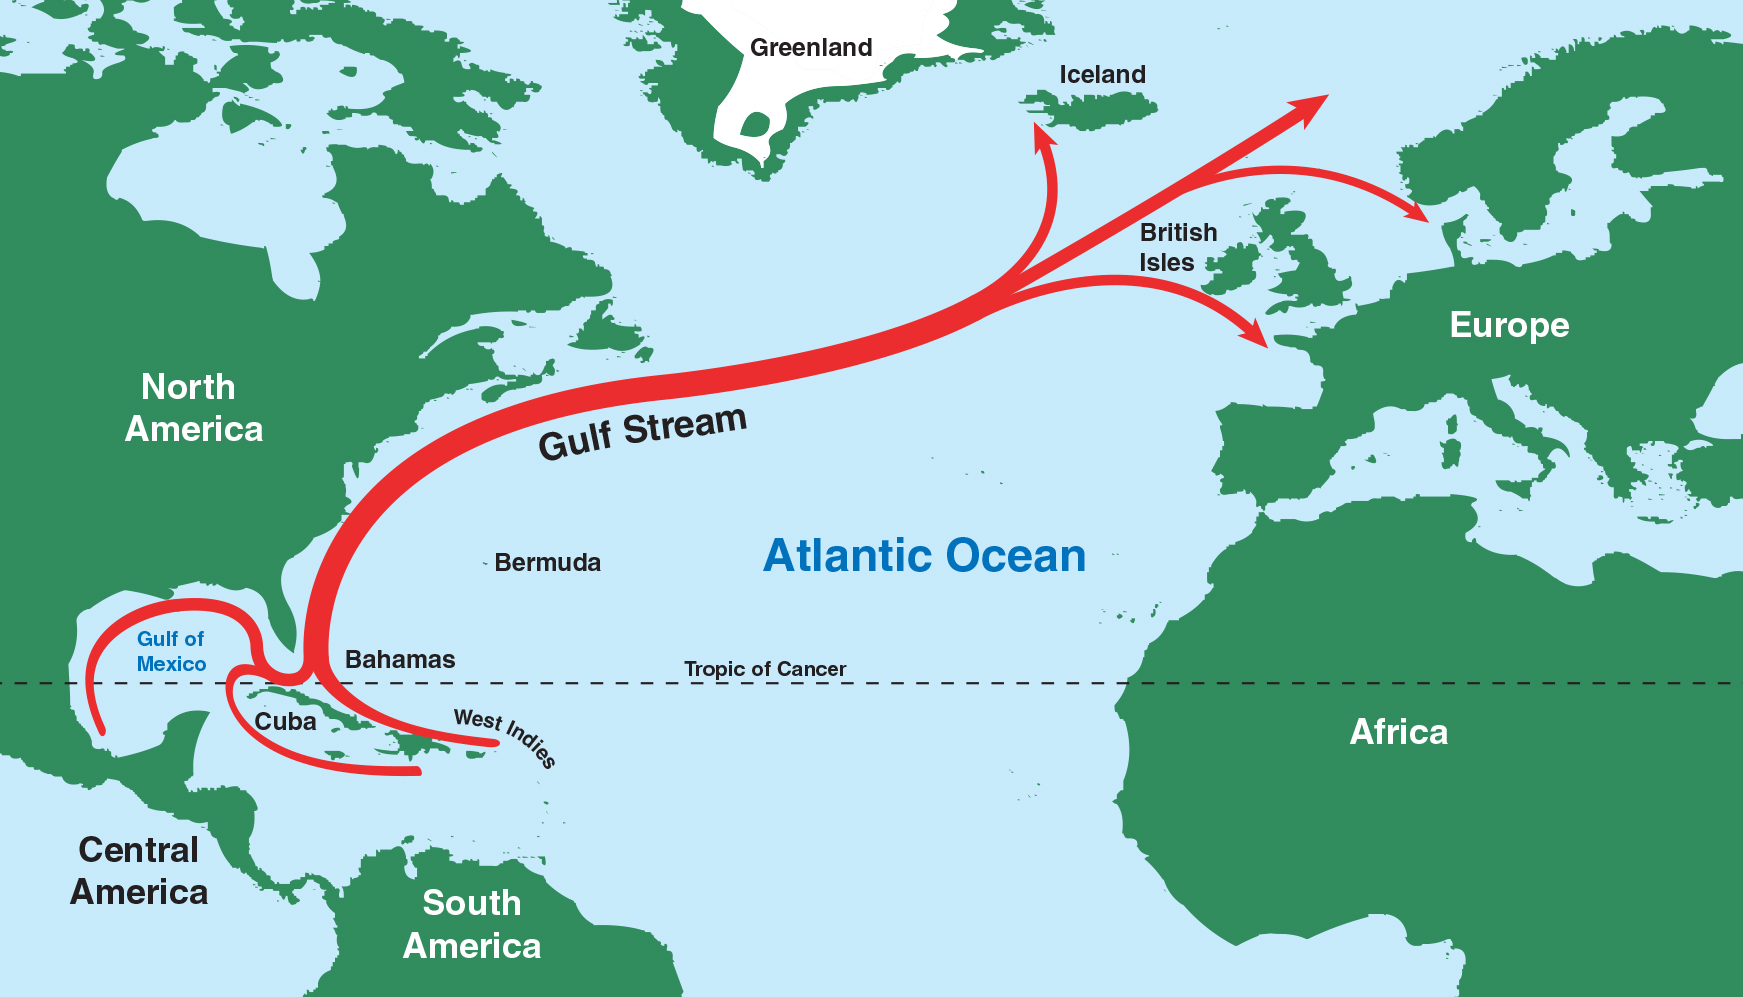 an illustration of the Gulf Stream beginning in the Gulf of Mexico and ending near the British Isles 